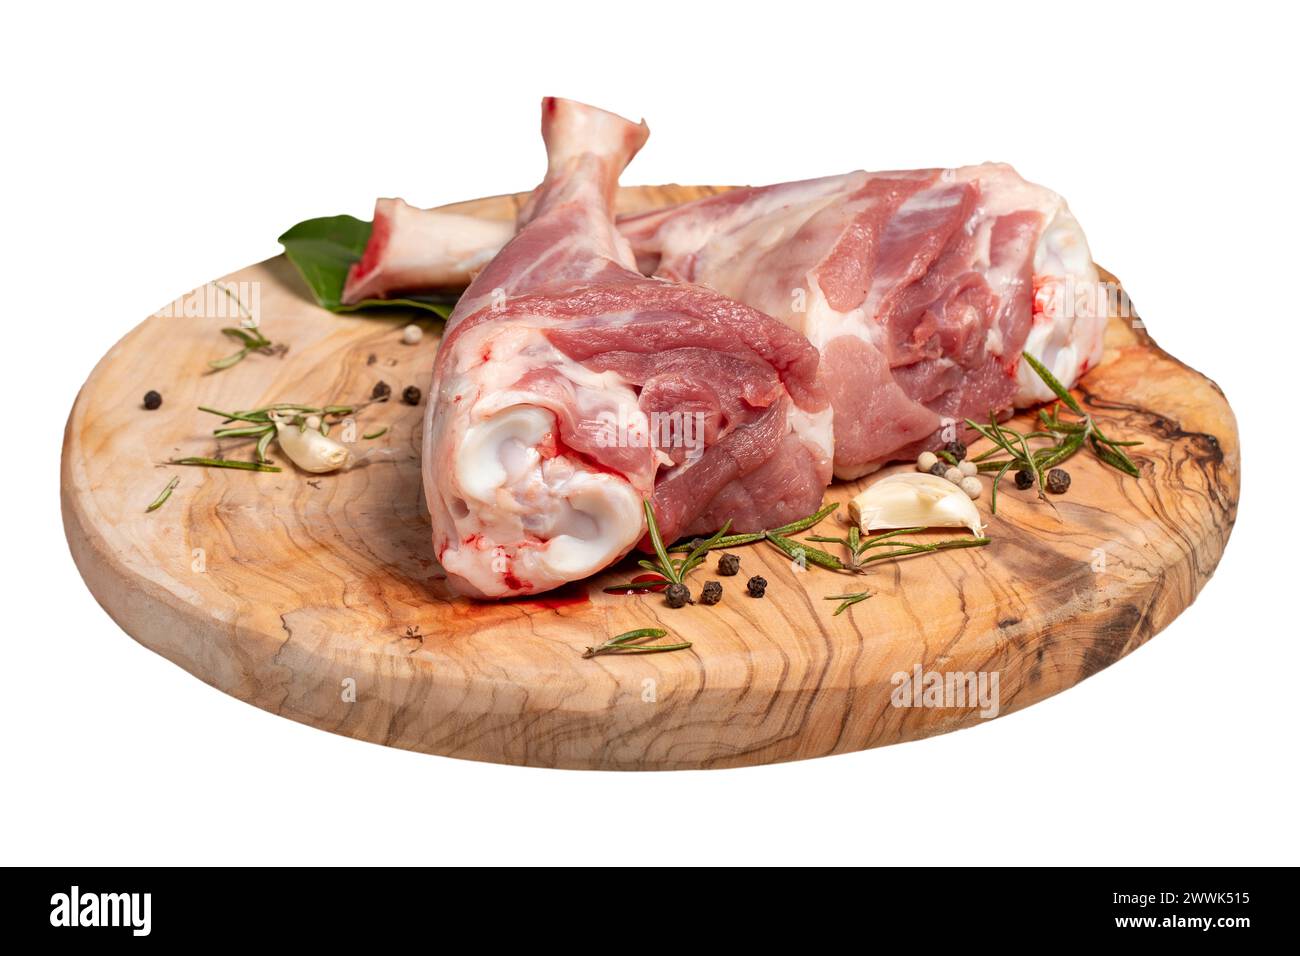 Lamb's shank. Butcher products. Lamb shank steak with bones isolated on white background. Stock Photo